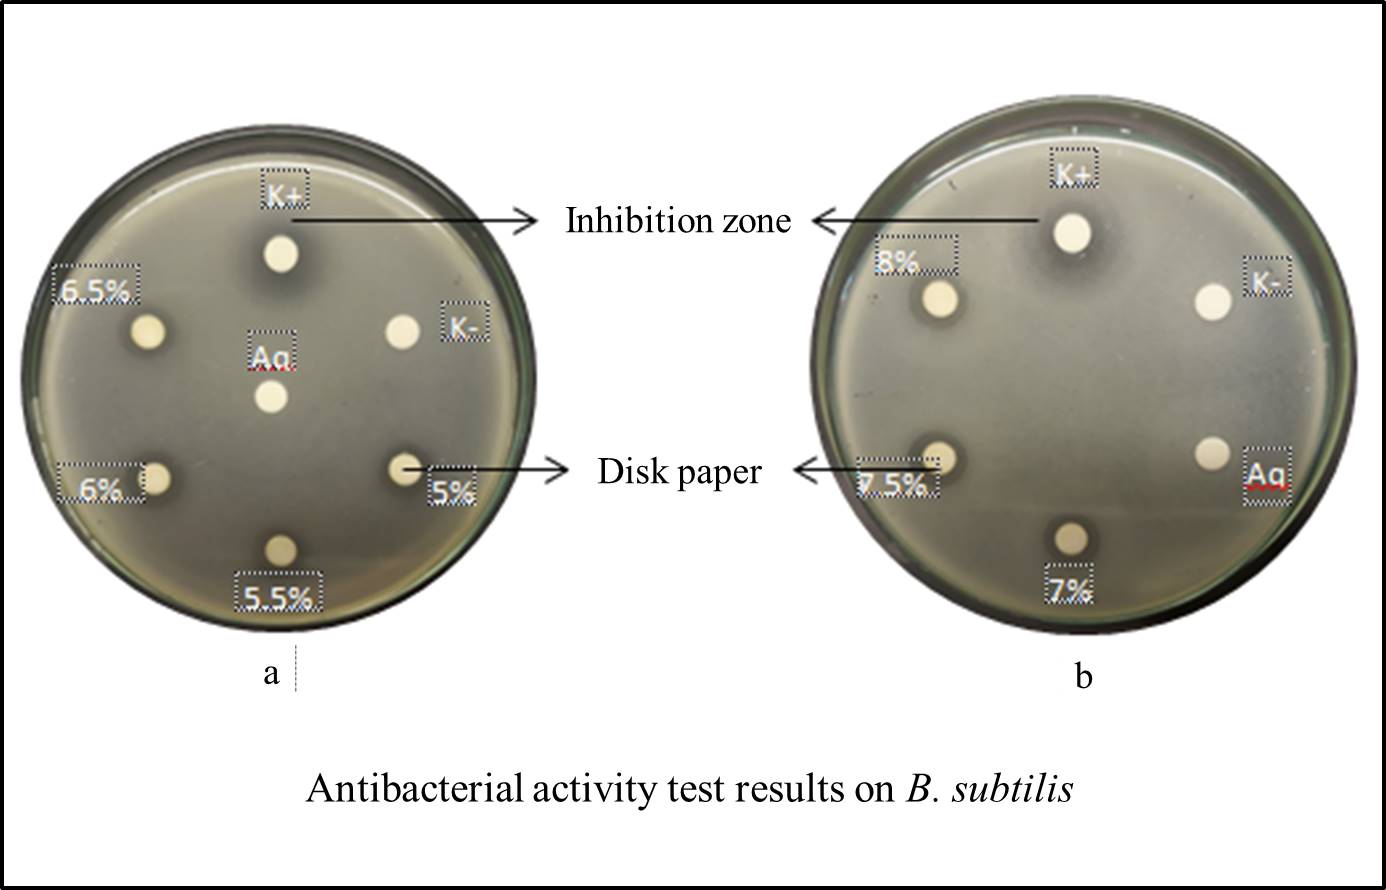 Antibacterial activity test results on B. subtilis